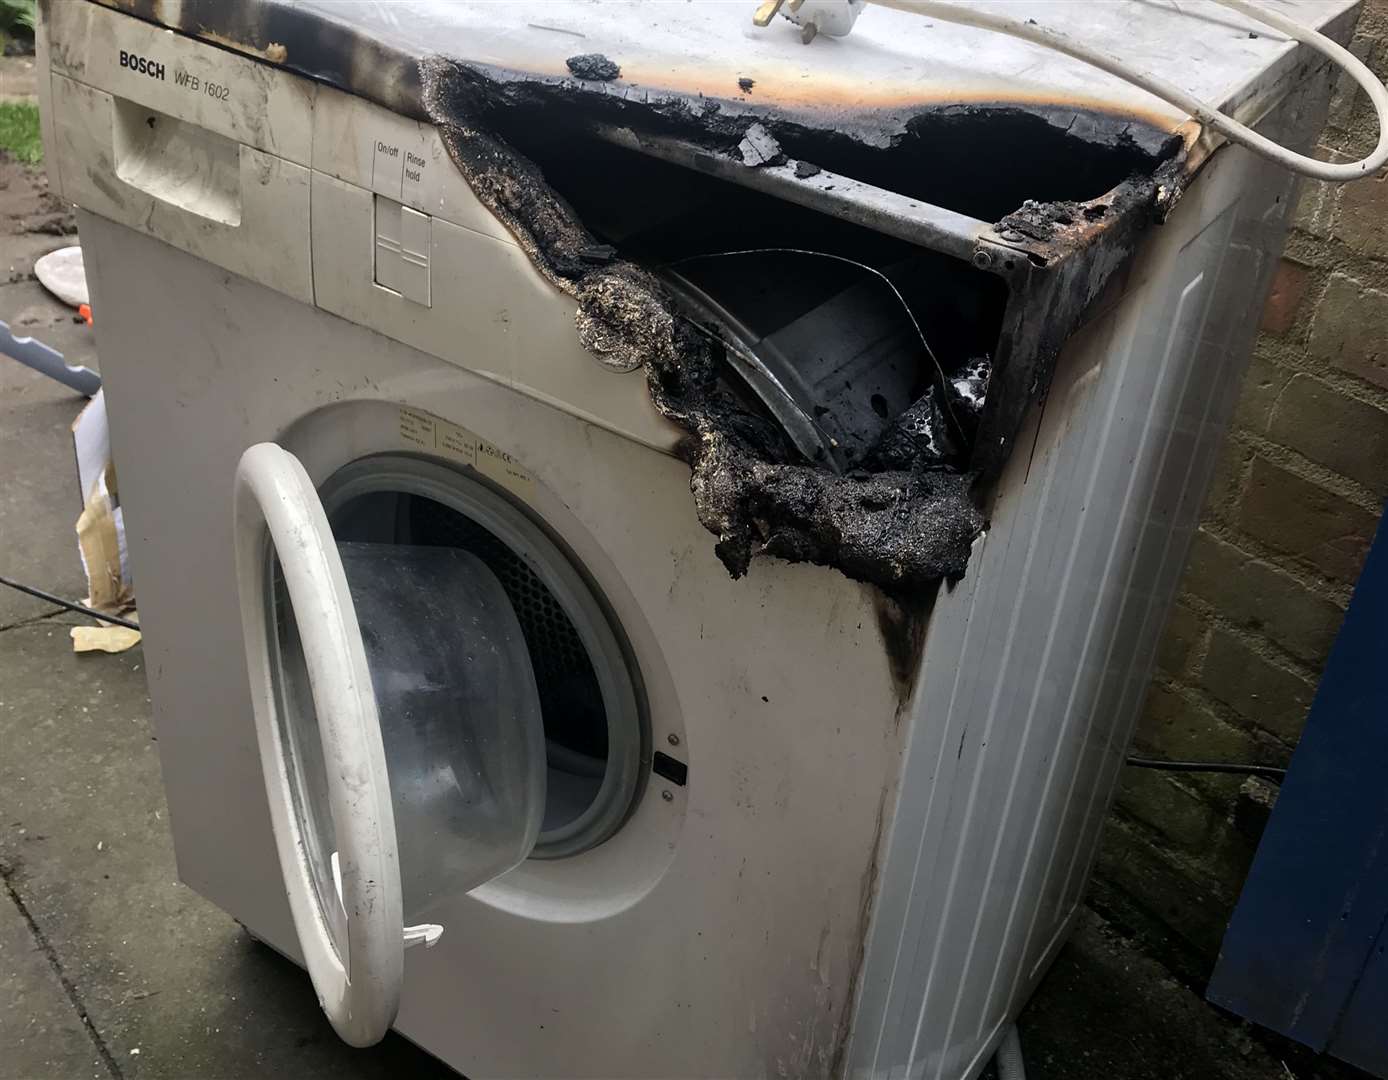 The fire is believed to have started inside the Bosch washing machine